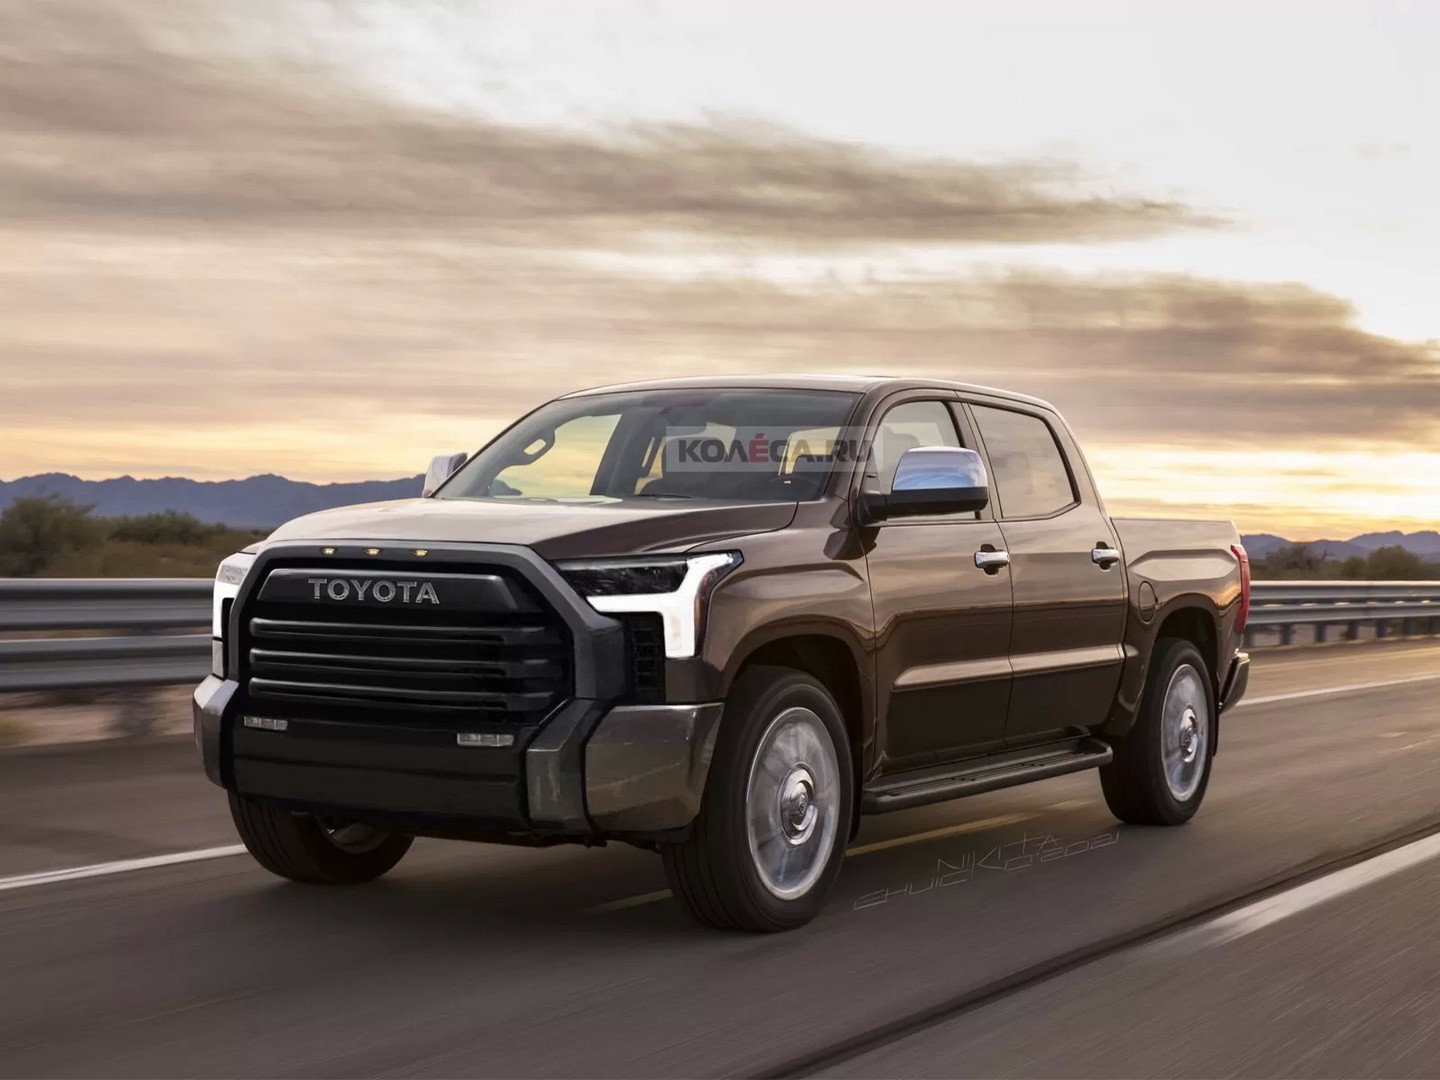 2022 Toyota Tundra TRD Pro Confirmed With Rear Coil Springs, Fox Shock